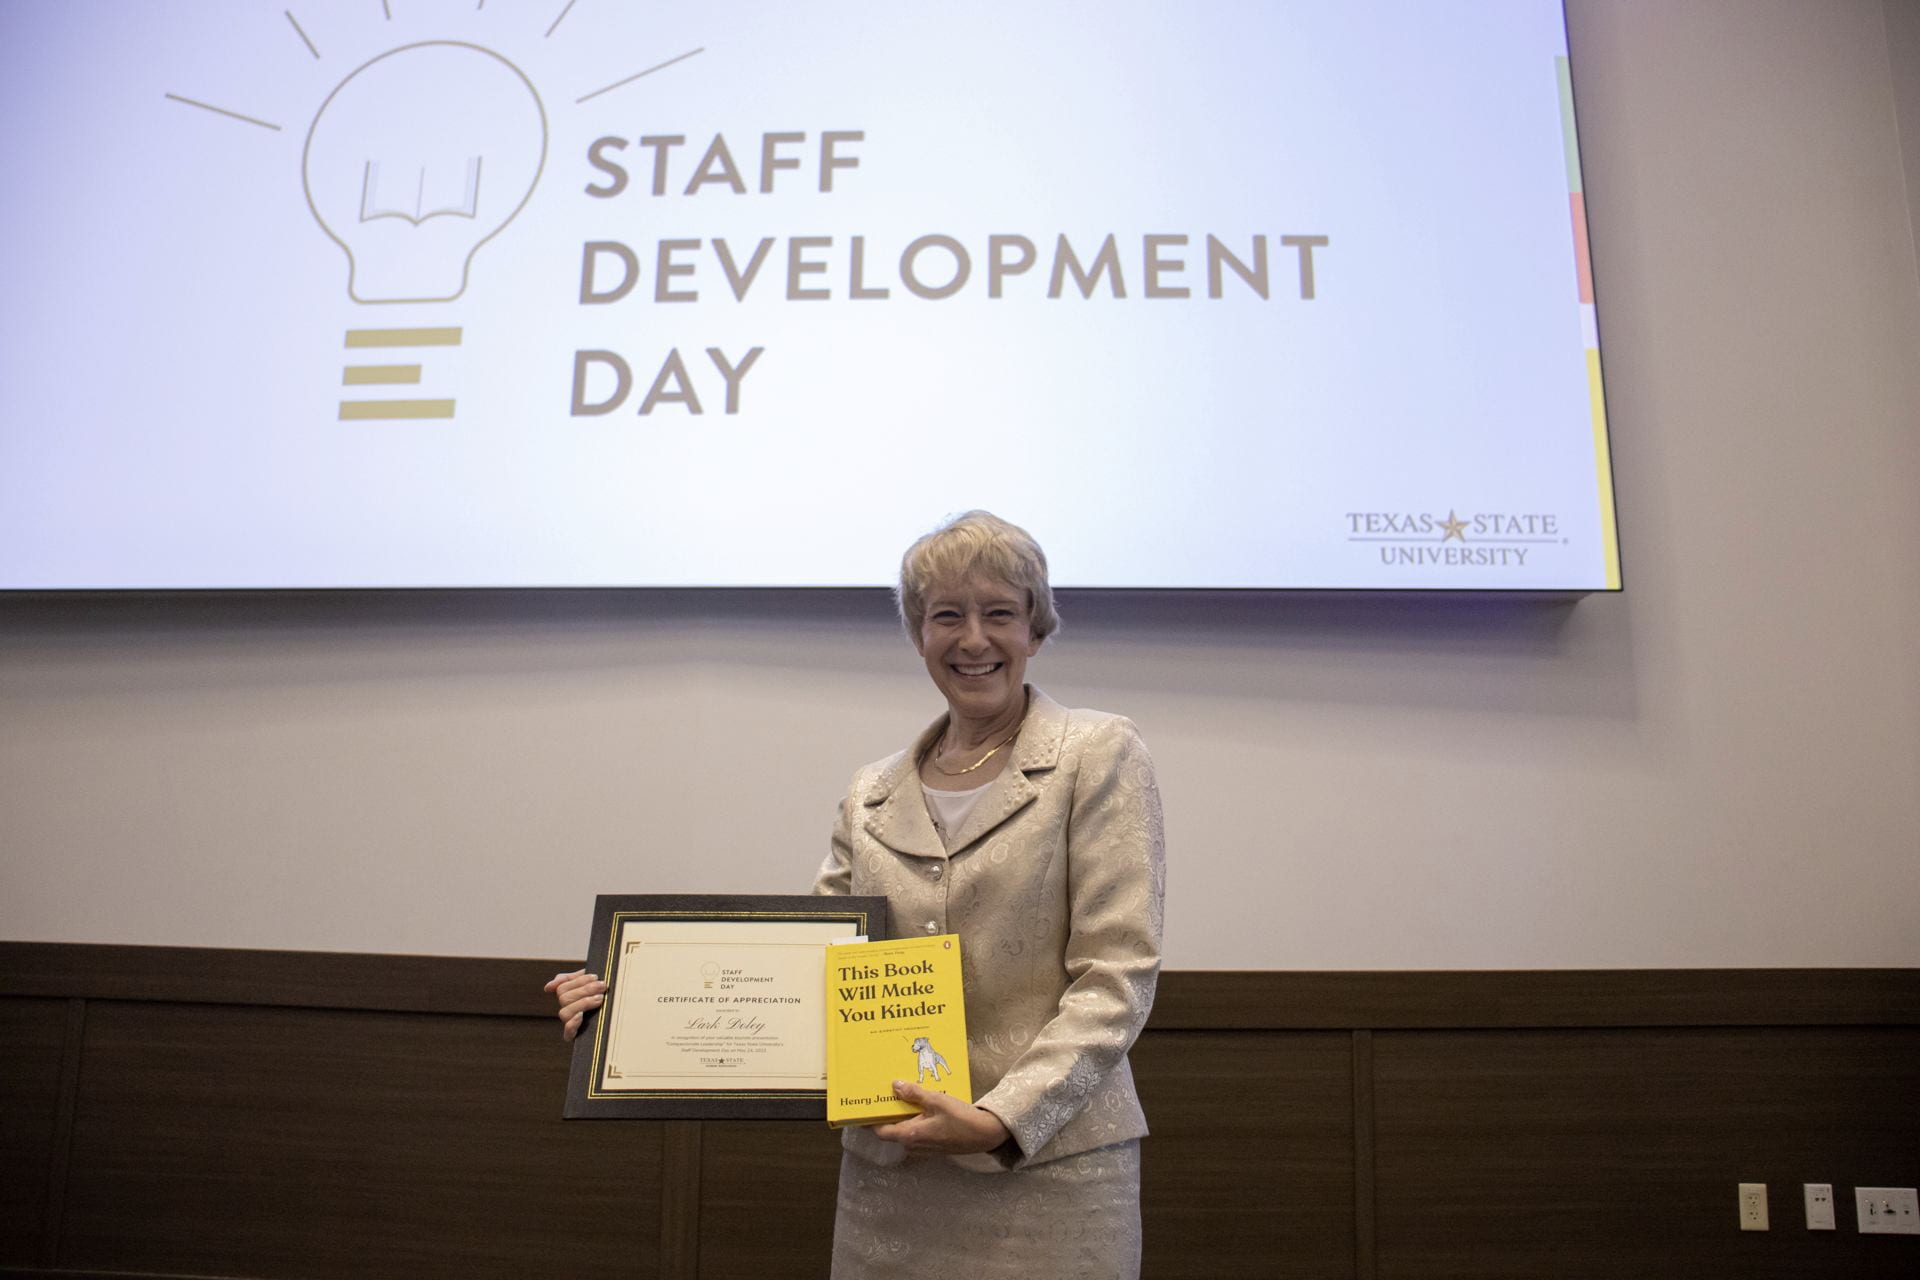 lark doley holding a book and a certificate